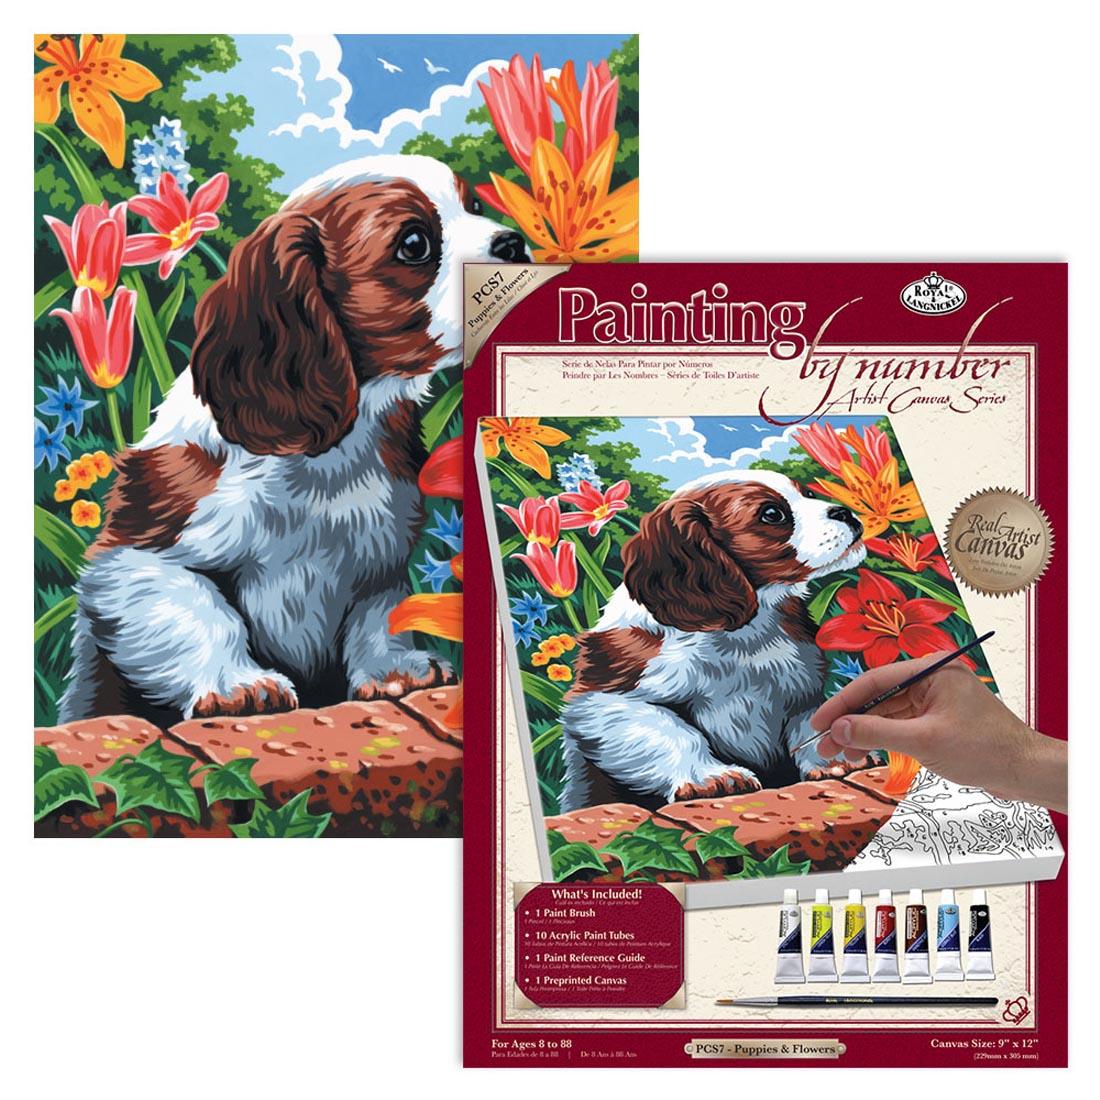 Royal & Langnickel Painting By Number Artist Canvas Series: Puppy & Flowers package with the completed painting behind it